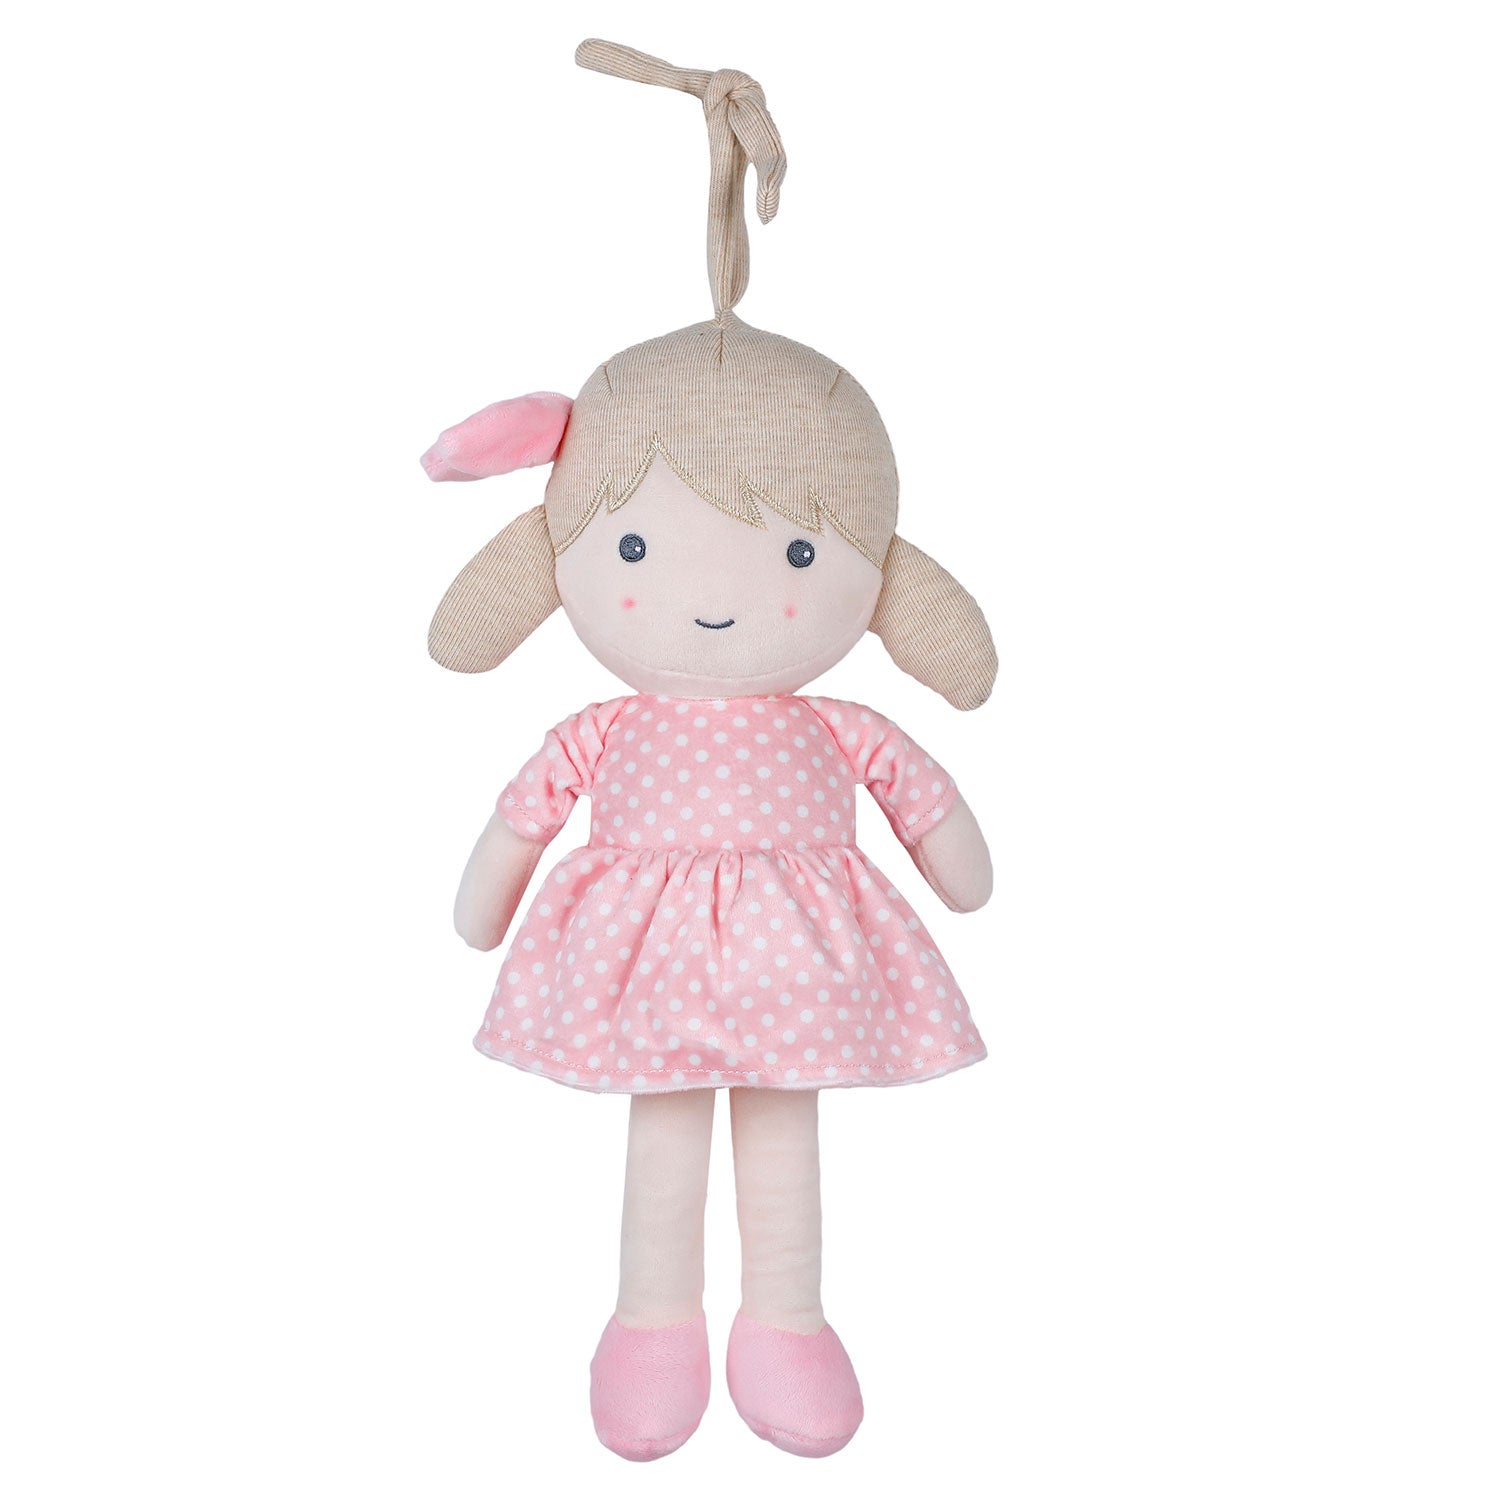 Baby Moo Little Girl Hanging Musical Pulling Toy - Pink